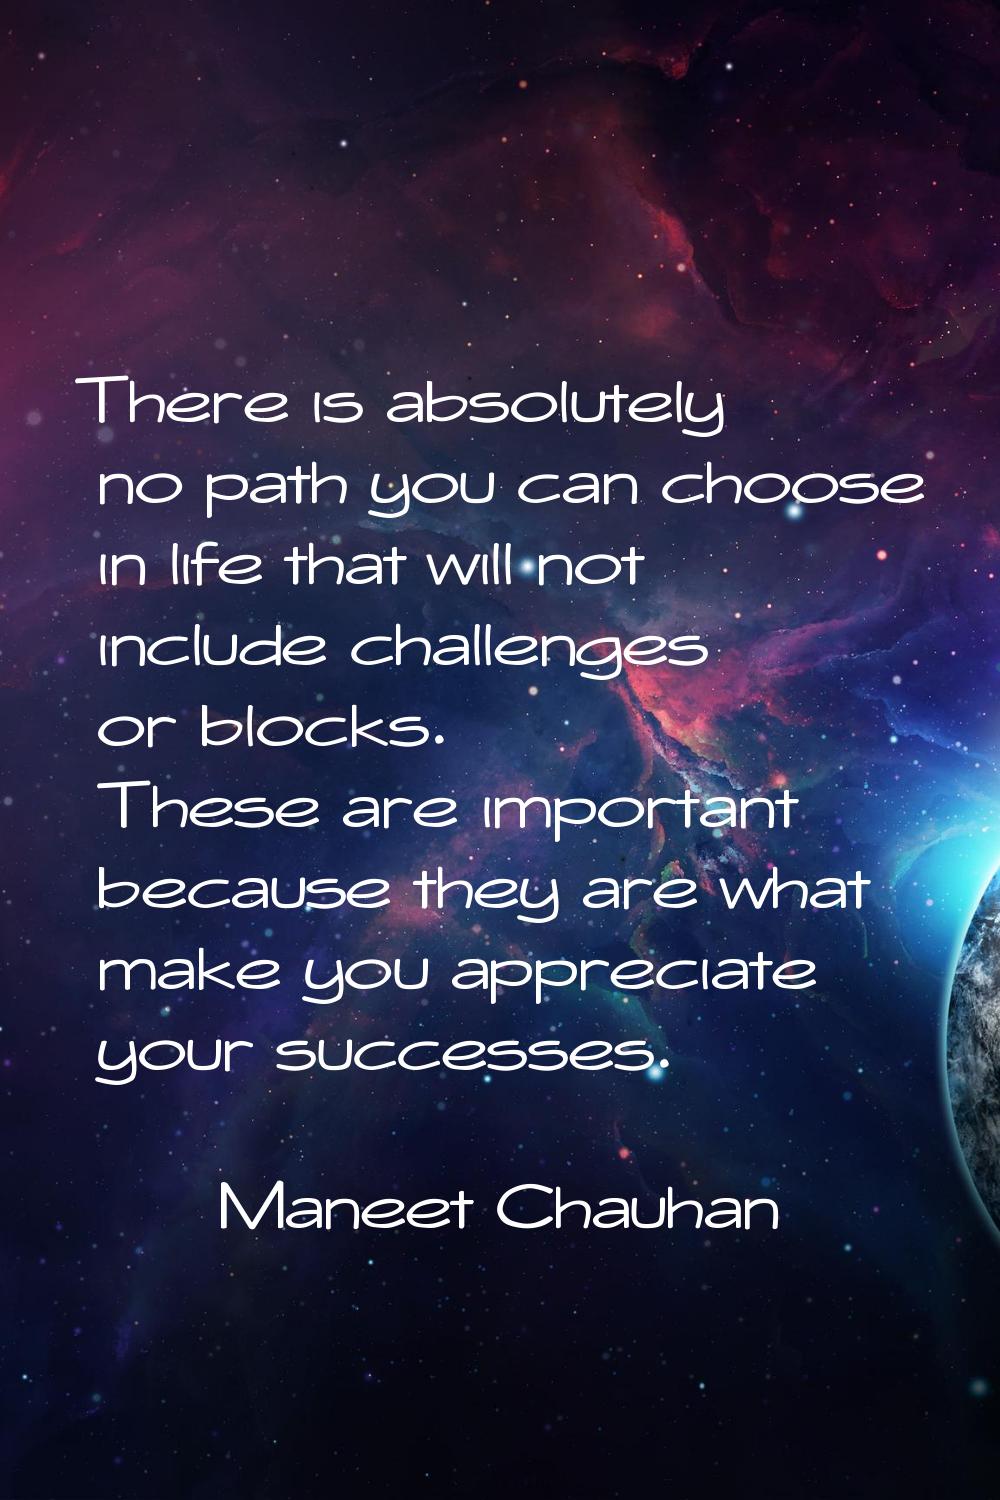 There is absolutely no path you can choose in life that will not include challenges or blocks. Thes